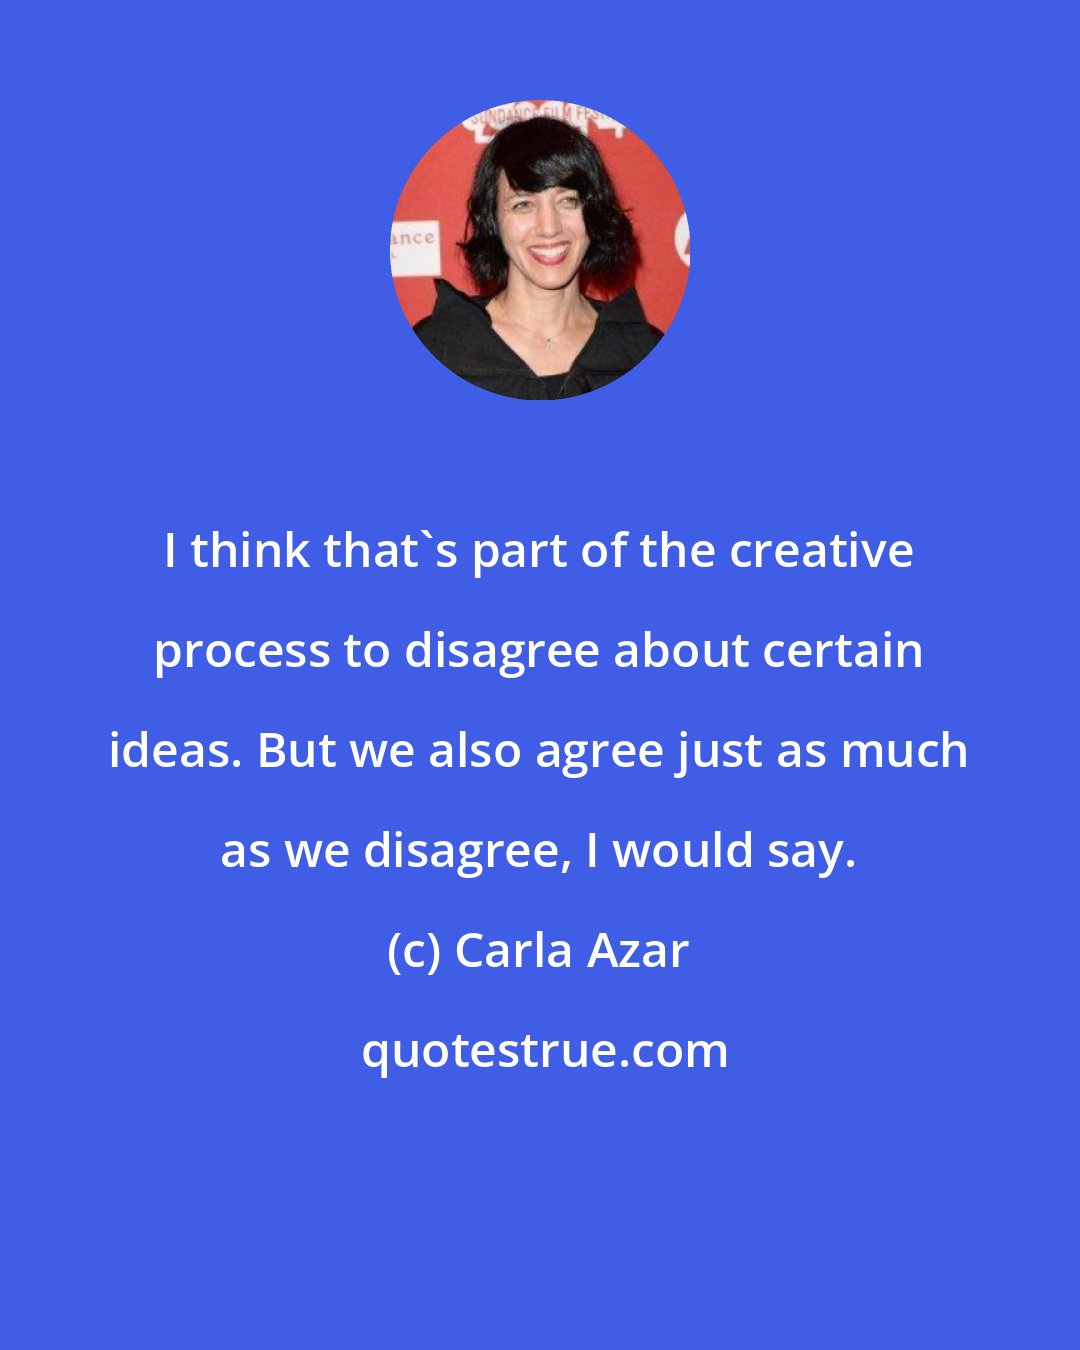 Carla Azar: I think that's part of the creative process to disagree about certain ideas. But we also agree just as much as we disagree, I would say.